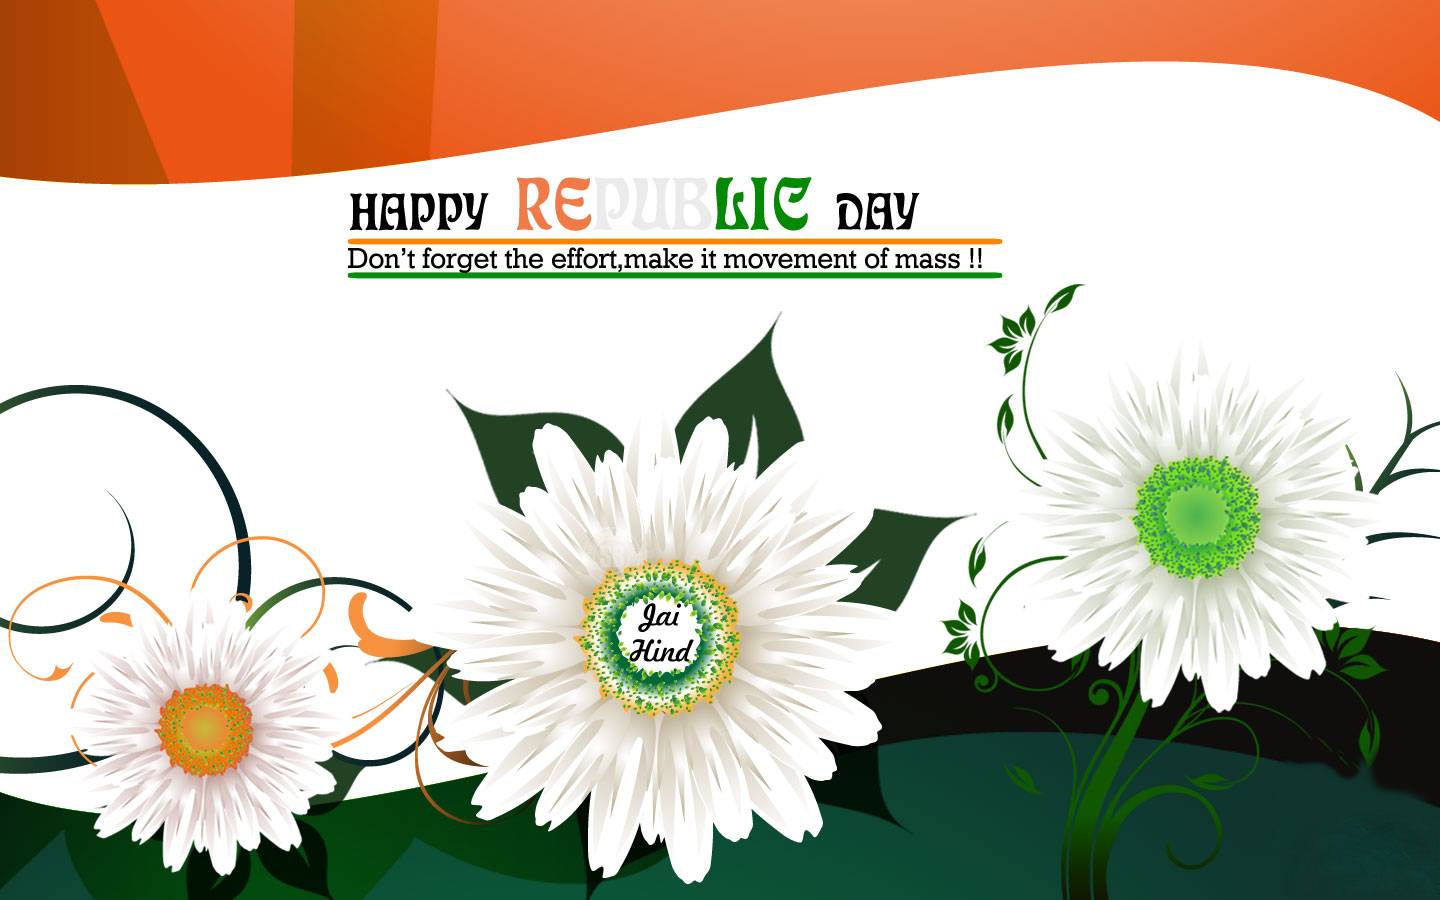 Happy Republic Day Greetings With Slogan In Image Flower